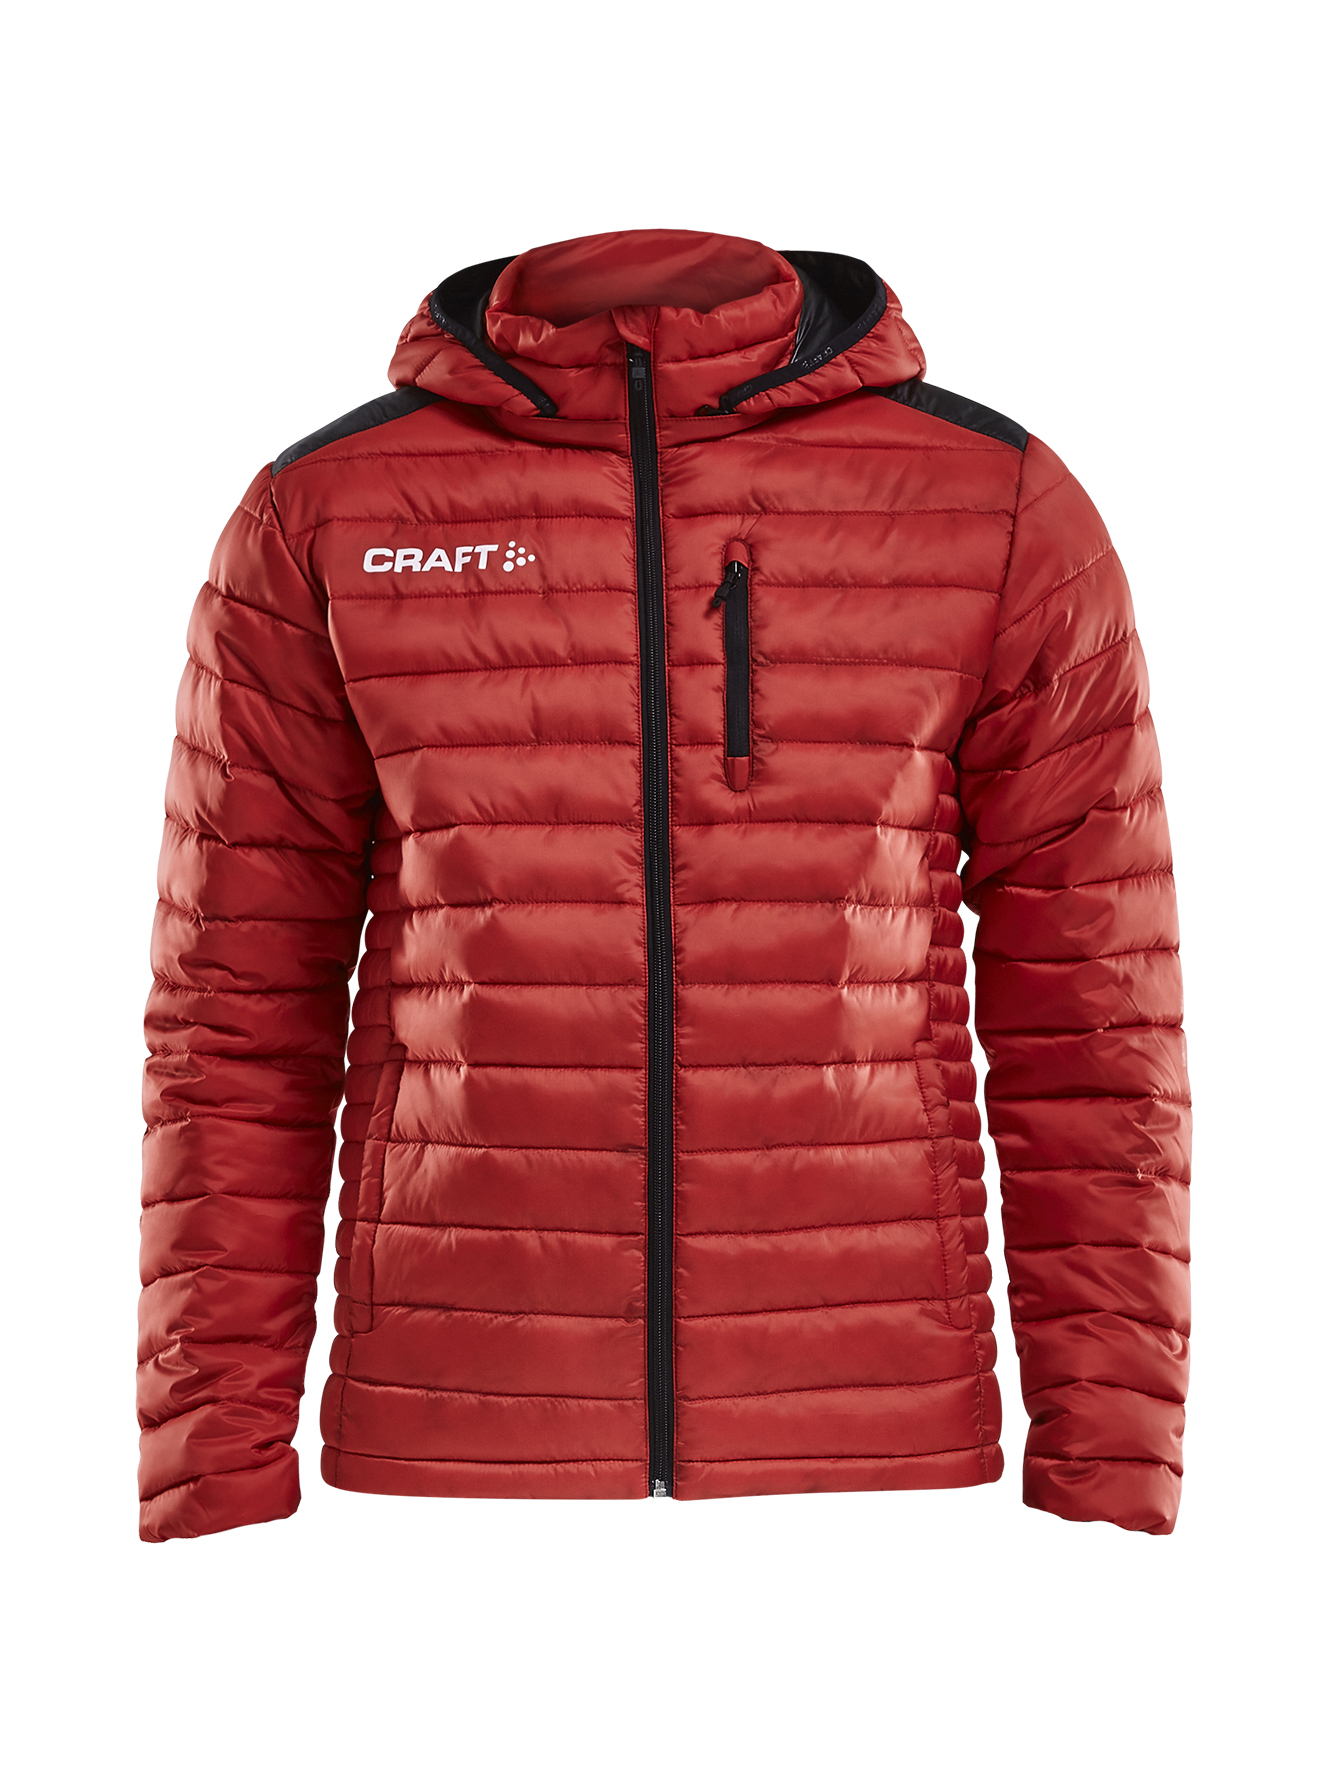 Craft Isolate Jacket M BRIGHT RED/BLACK